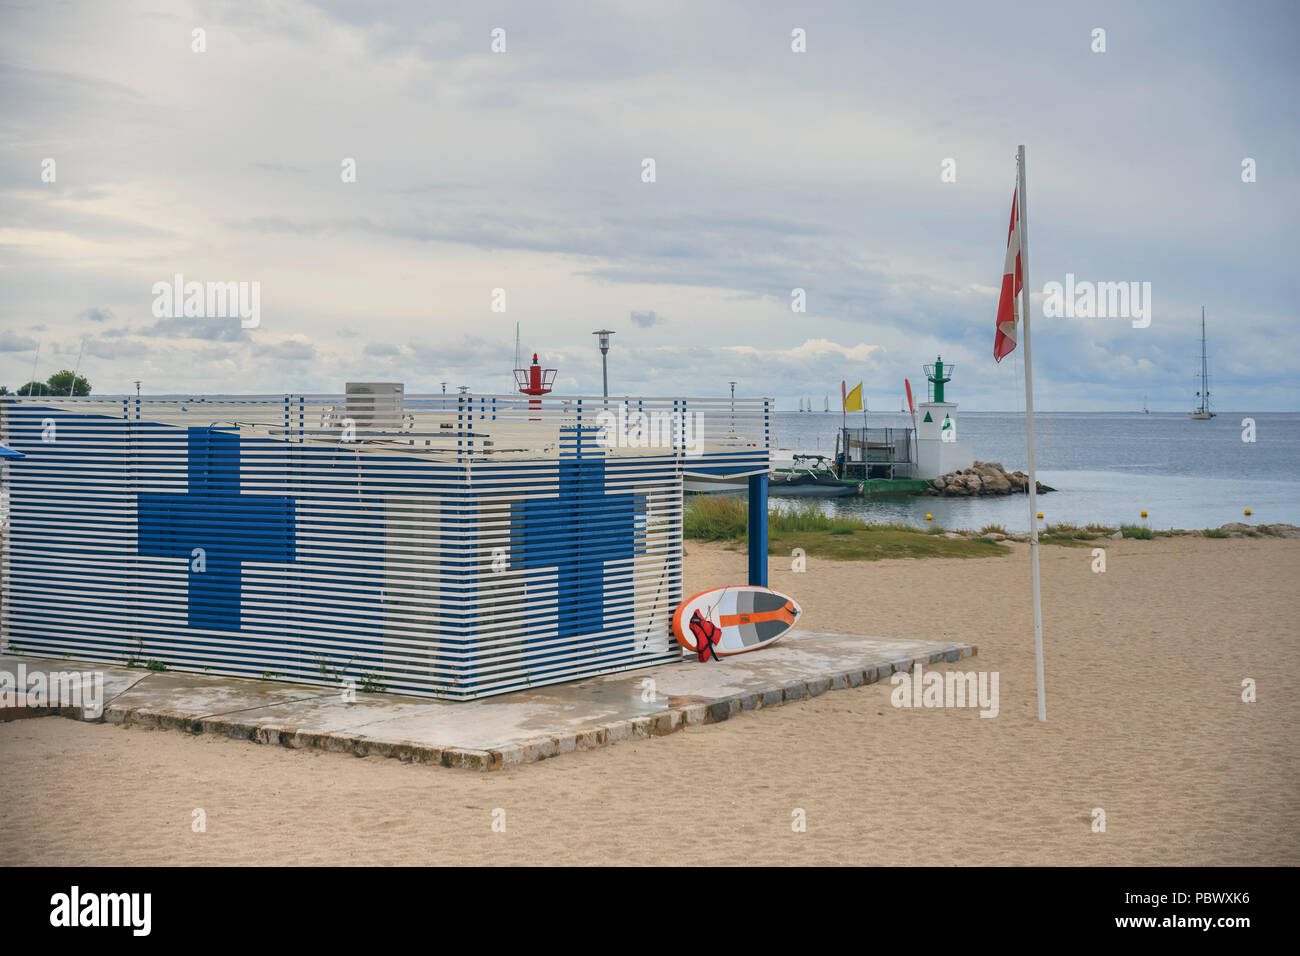 station First-aid on the background of a deserted sandy beach and snow-white yachts in the sea in the Spanish city of Magaluf Stock Photo